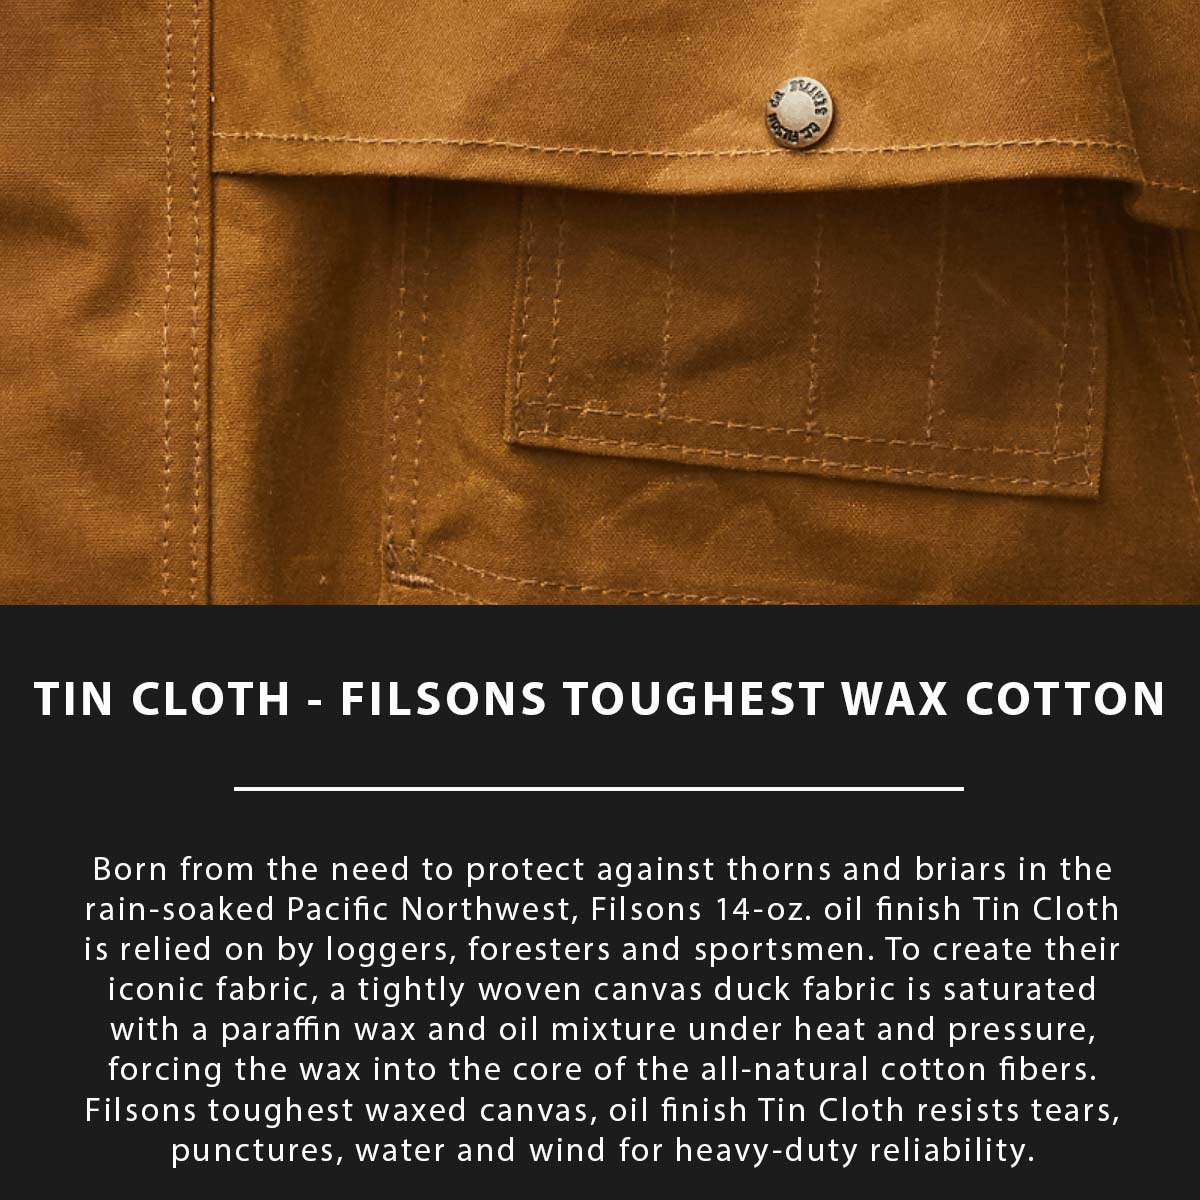 Filson Tin Cloth Hood, made of the legendary super strong, lightweight, and oil impregnated 14-oz. Tin Cloth canvas